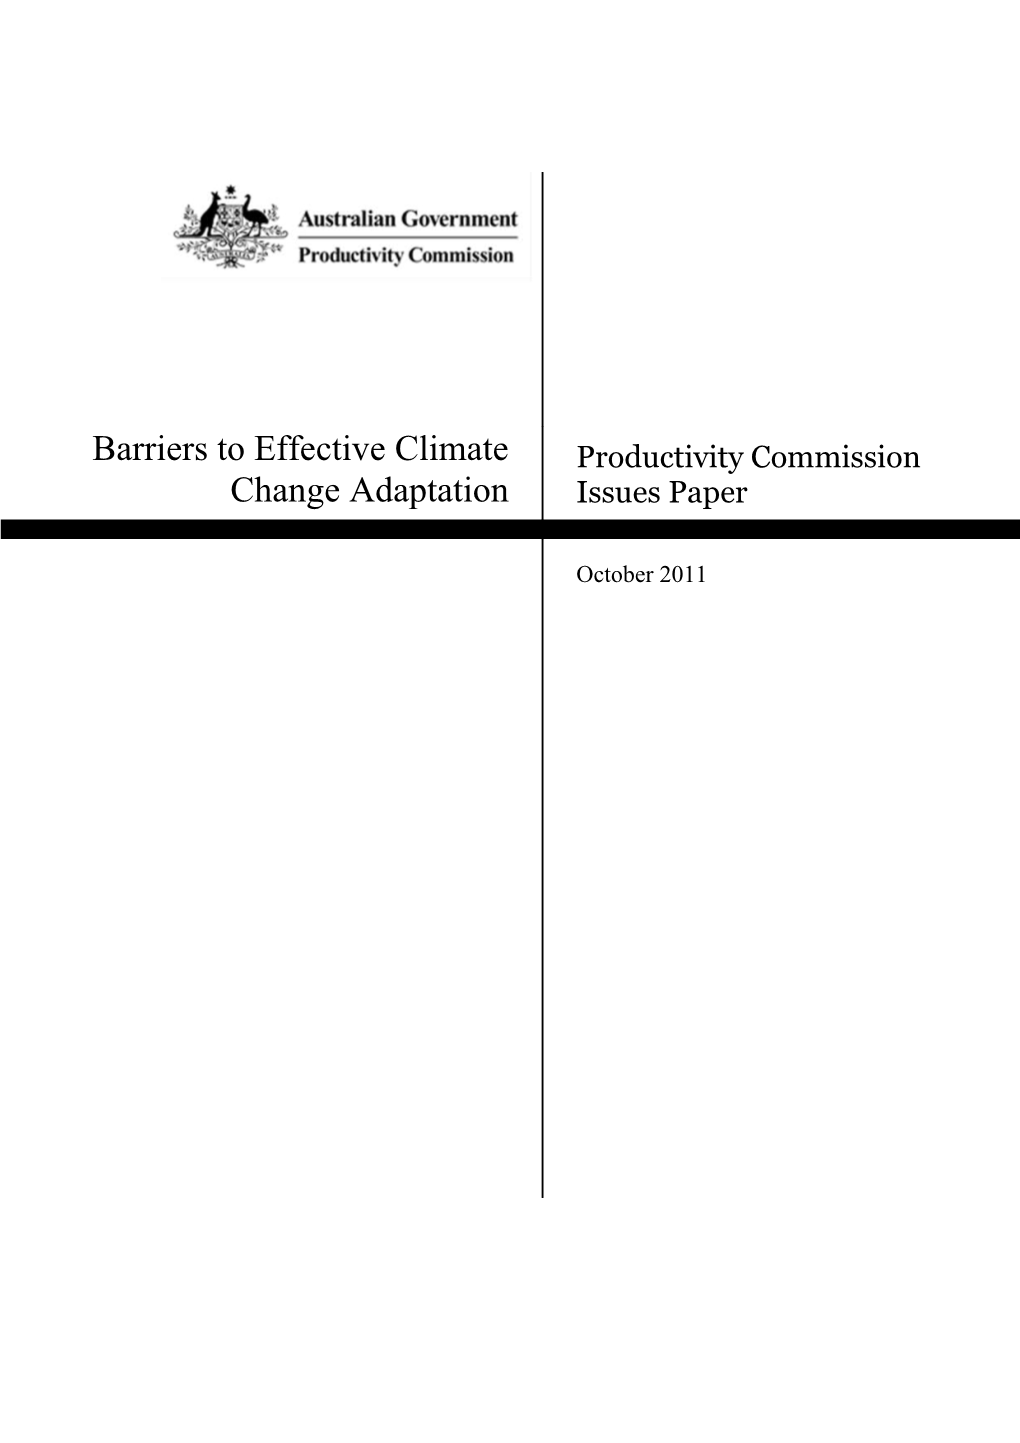 Issues Paper - Barriers to Effective Climate Change Adaptation